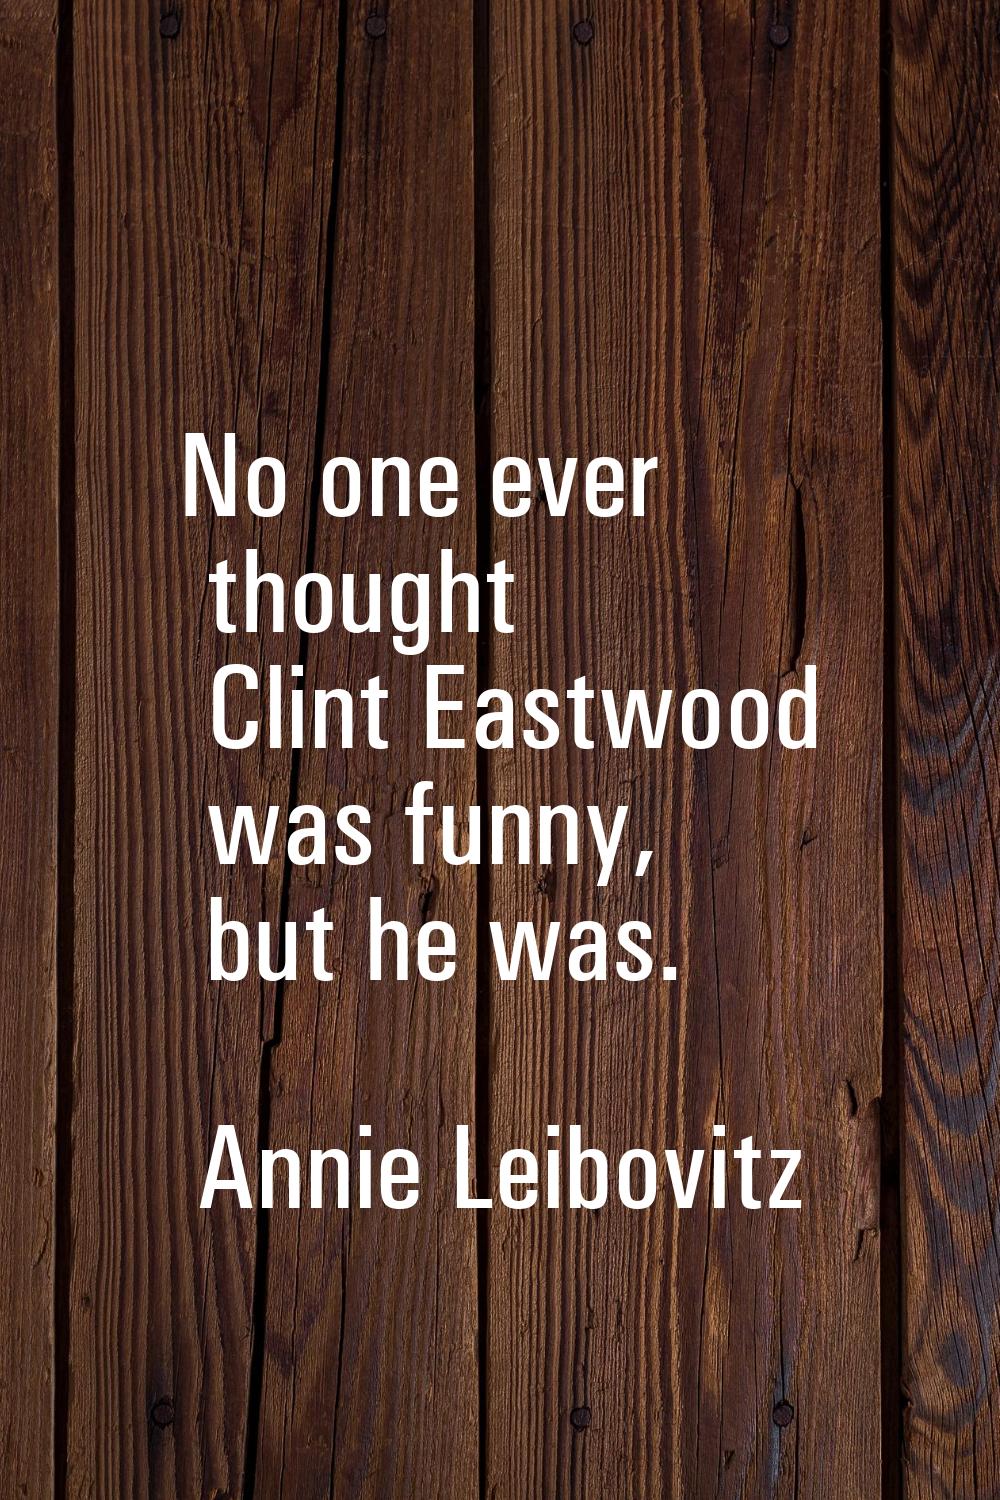 No one ever thought Clint Eastwood was funny, but he was.